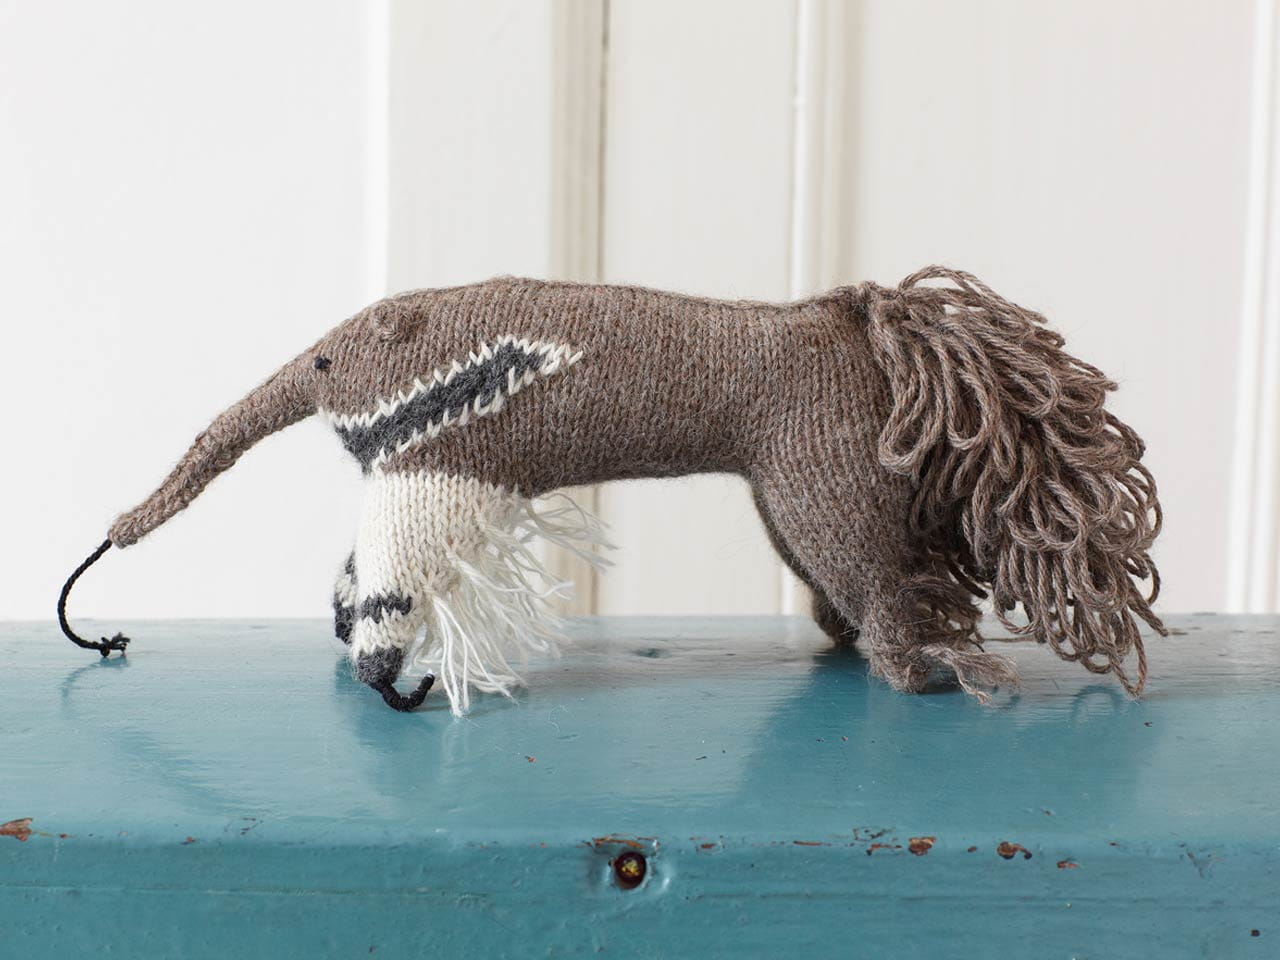 Knitted anteater